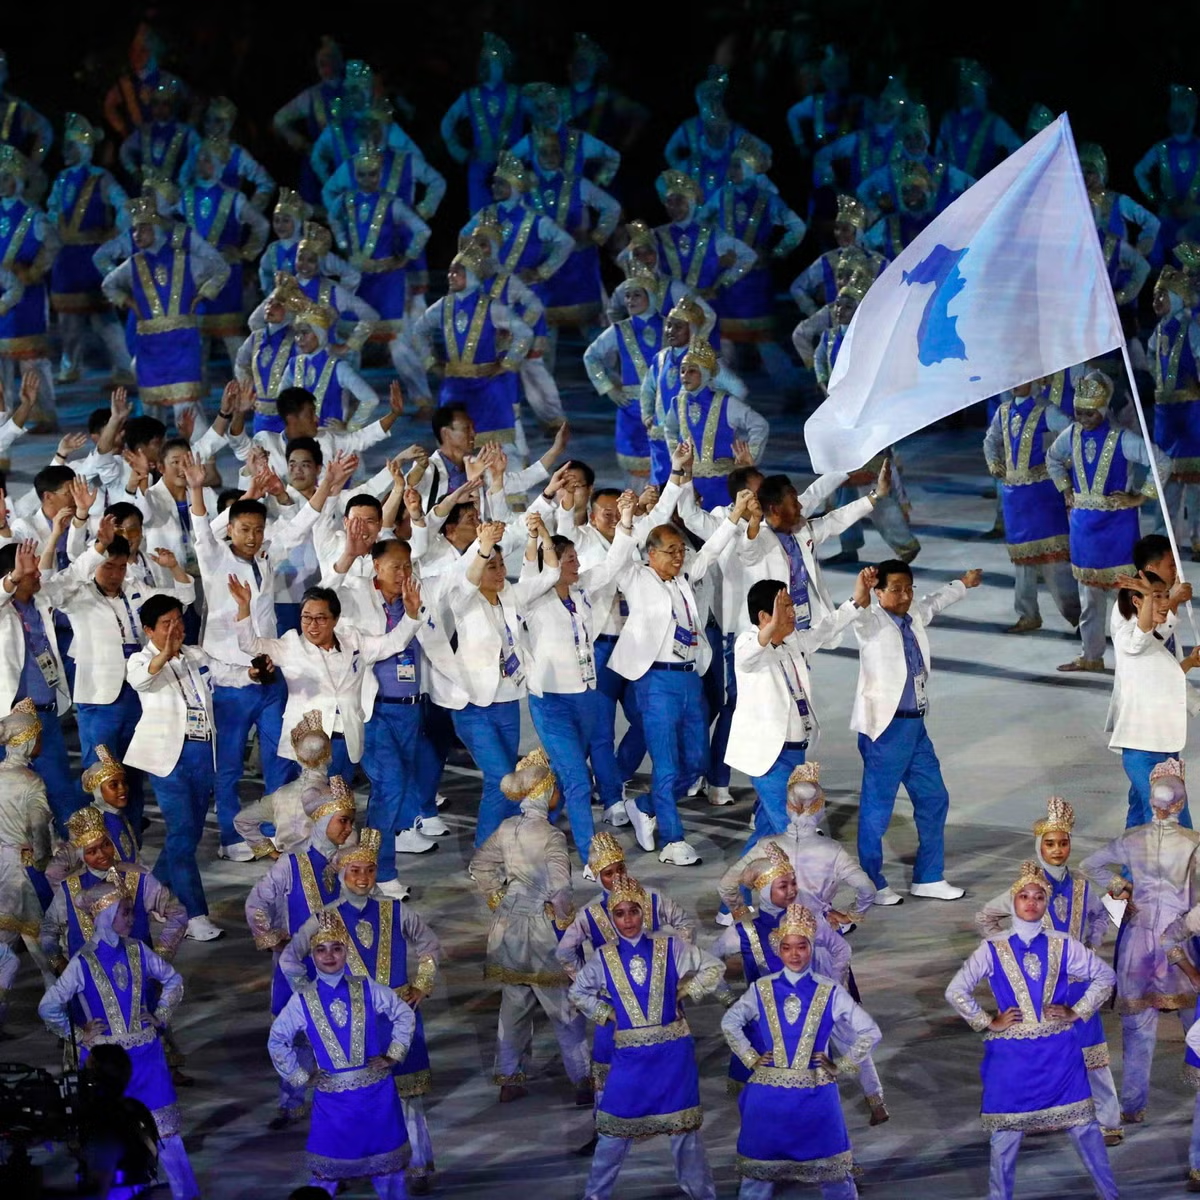 North and South Korea marched together under the unification flag at the 2018 Asian Games, something that is not likely to be repeated at Hangzhou 2022 ©Getty Images